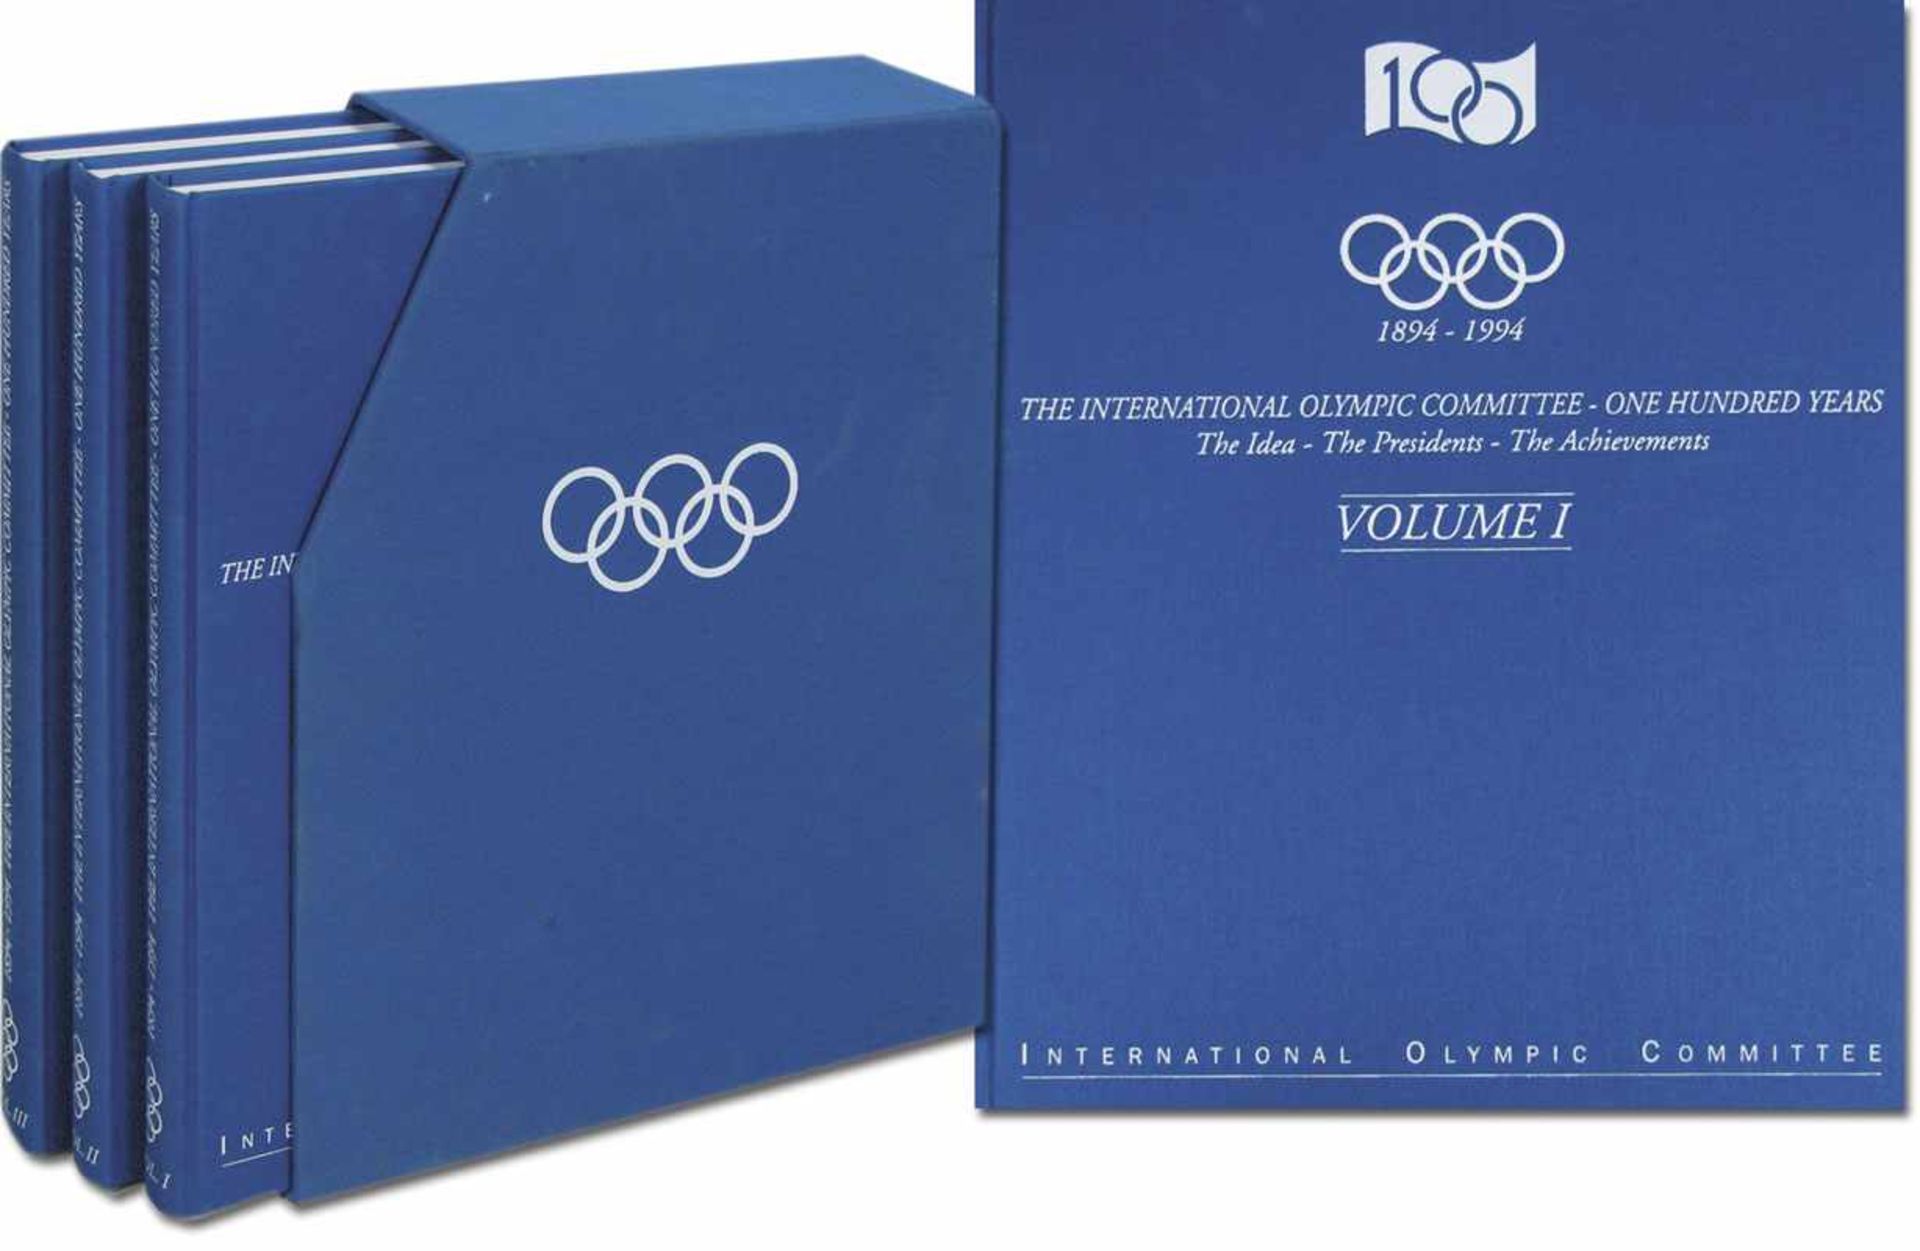 100 Years IOC and Olympic Games 1896 - 1994. - Un siécle du Comité International Olympique. The